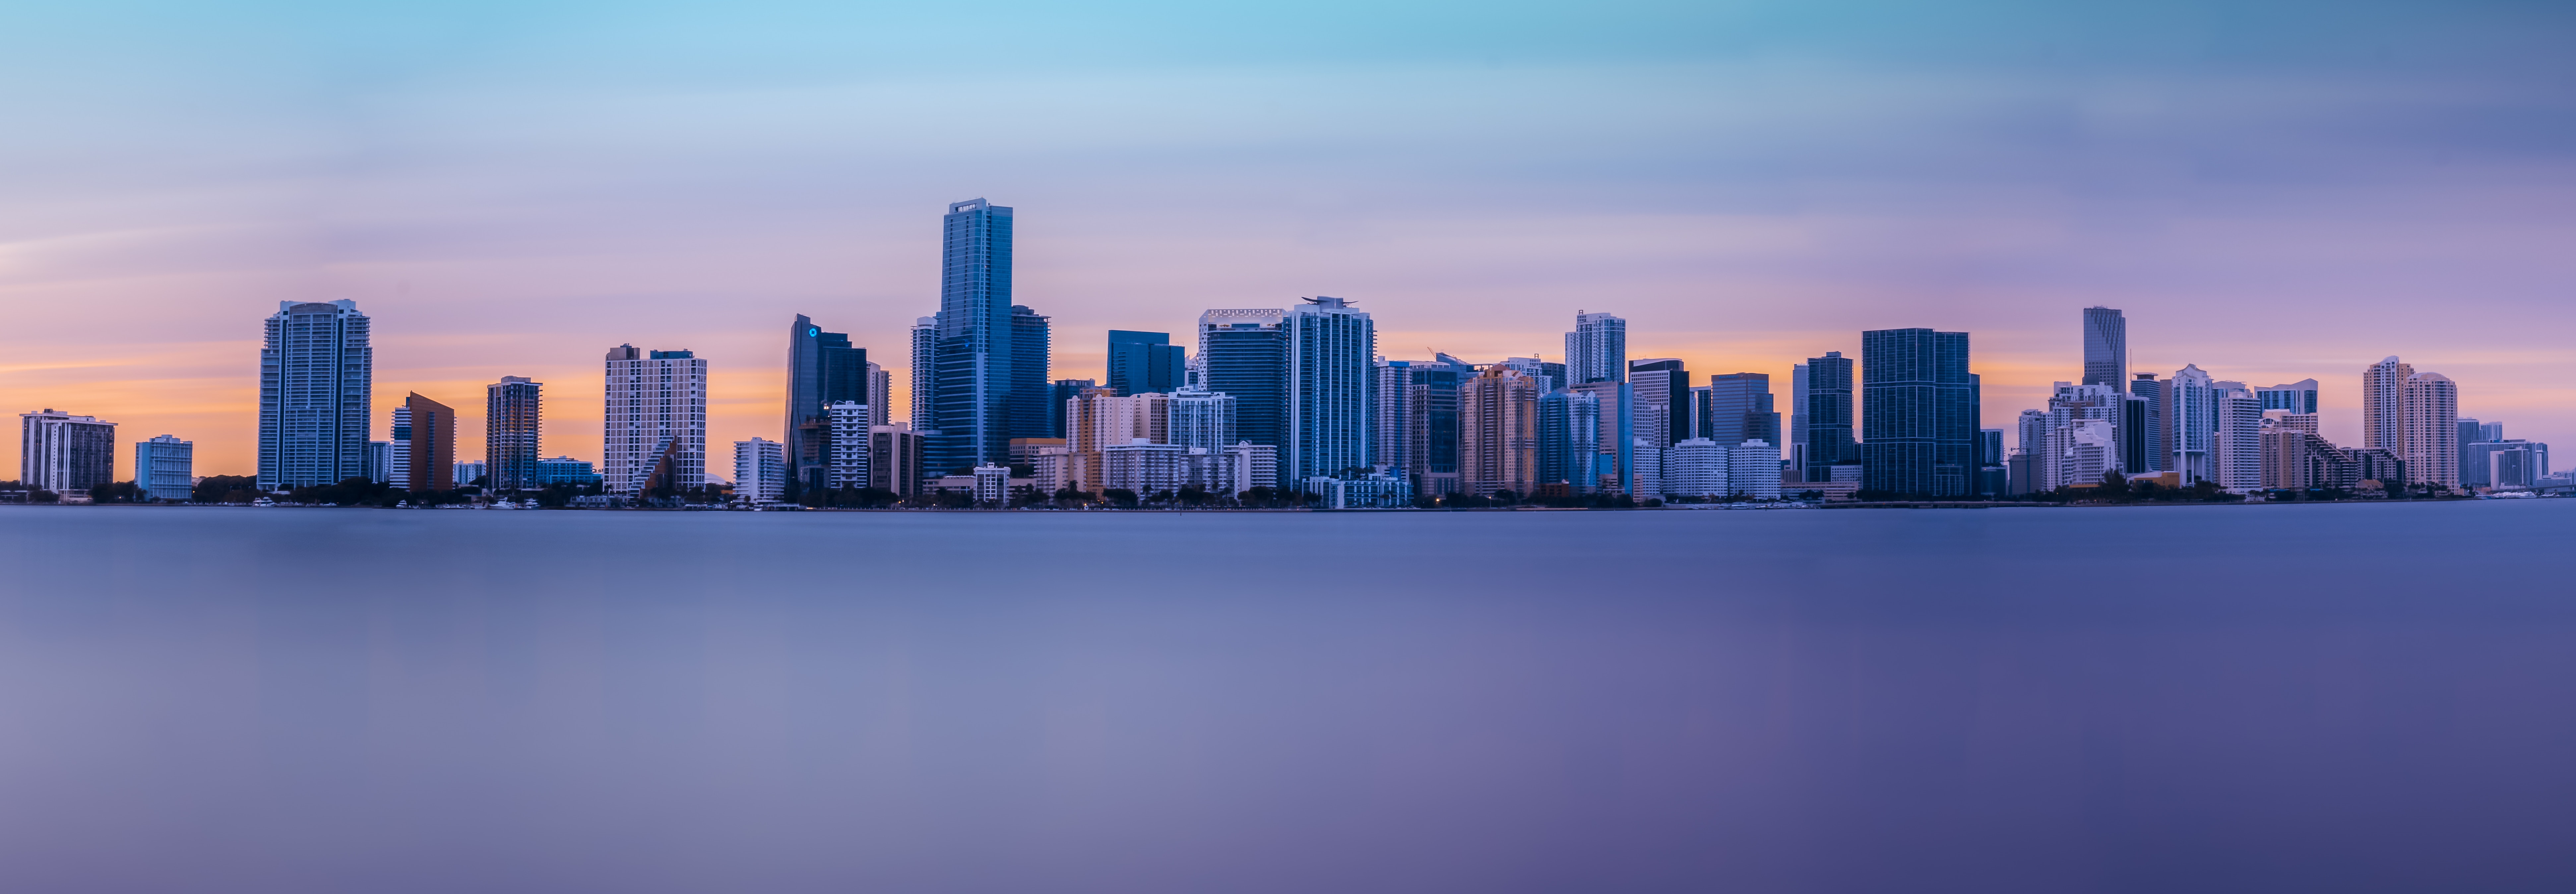 cities, usa, skyscrapers, united states, panorama, miami for android